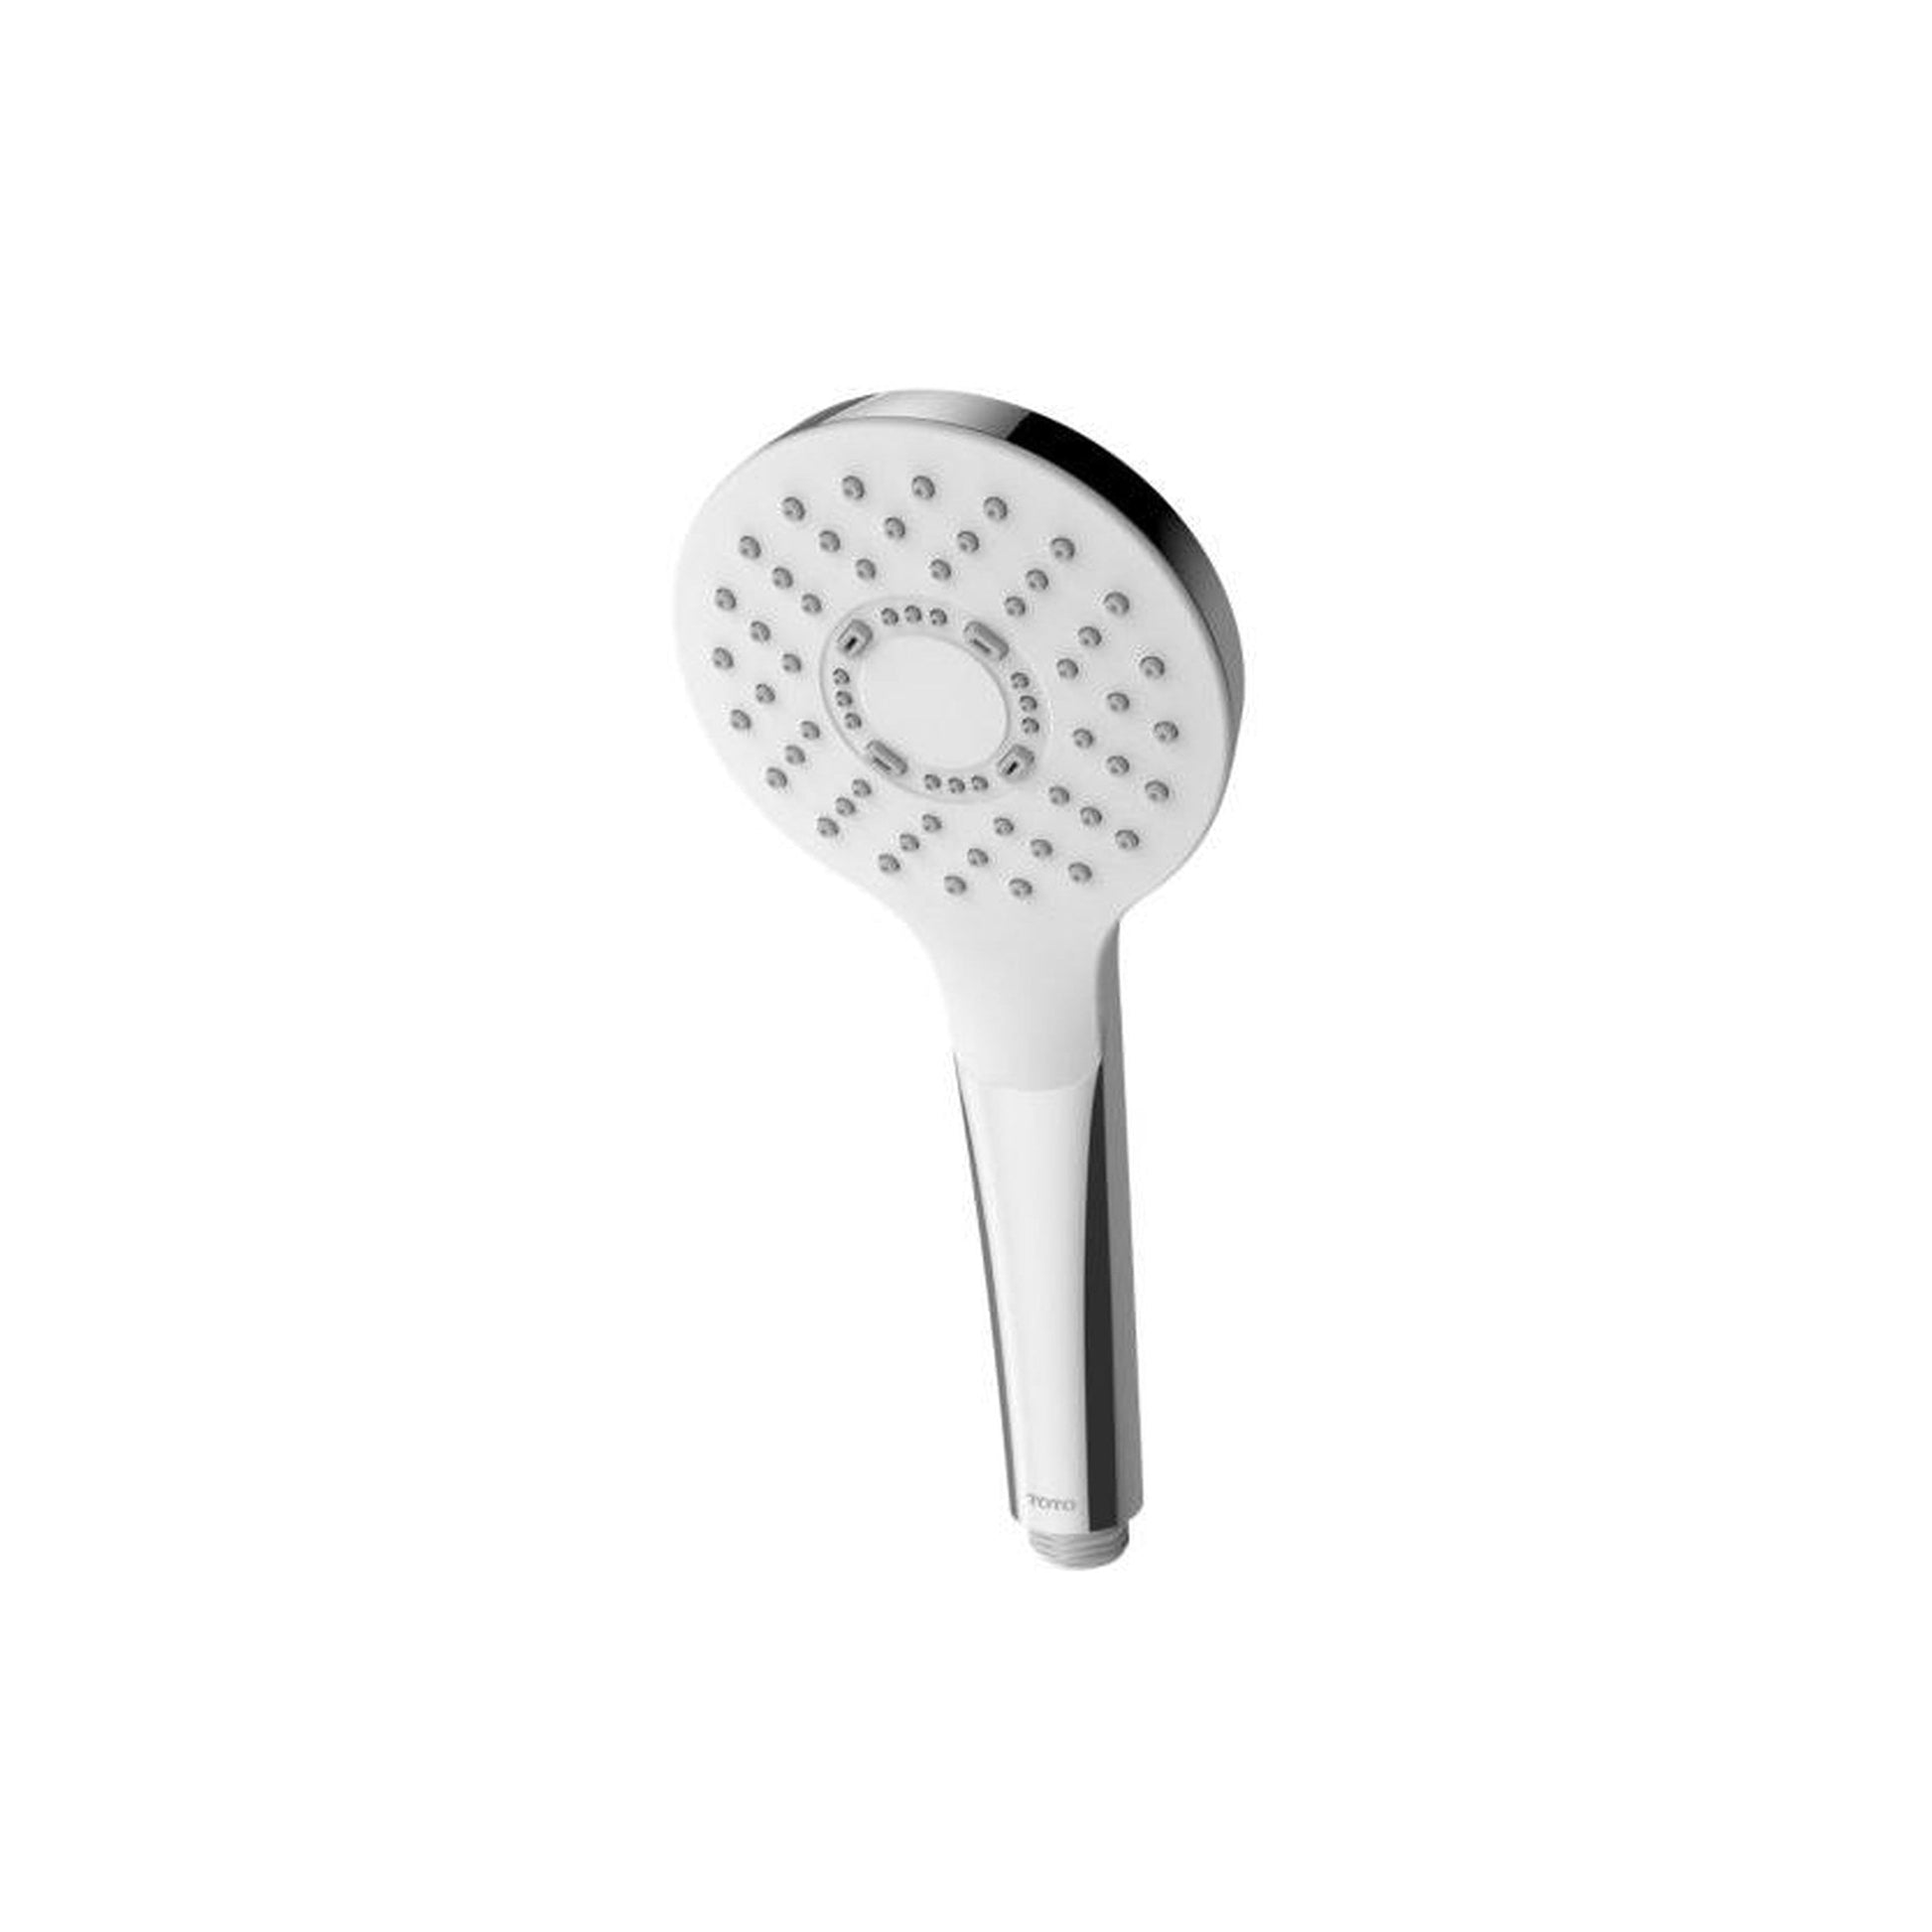 Toto Hs,1 Mode,1.75GPM,G,Round Brushed Nickel